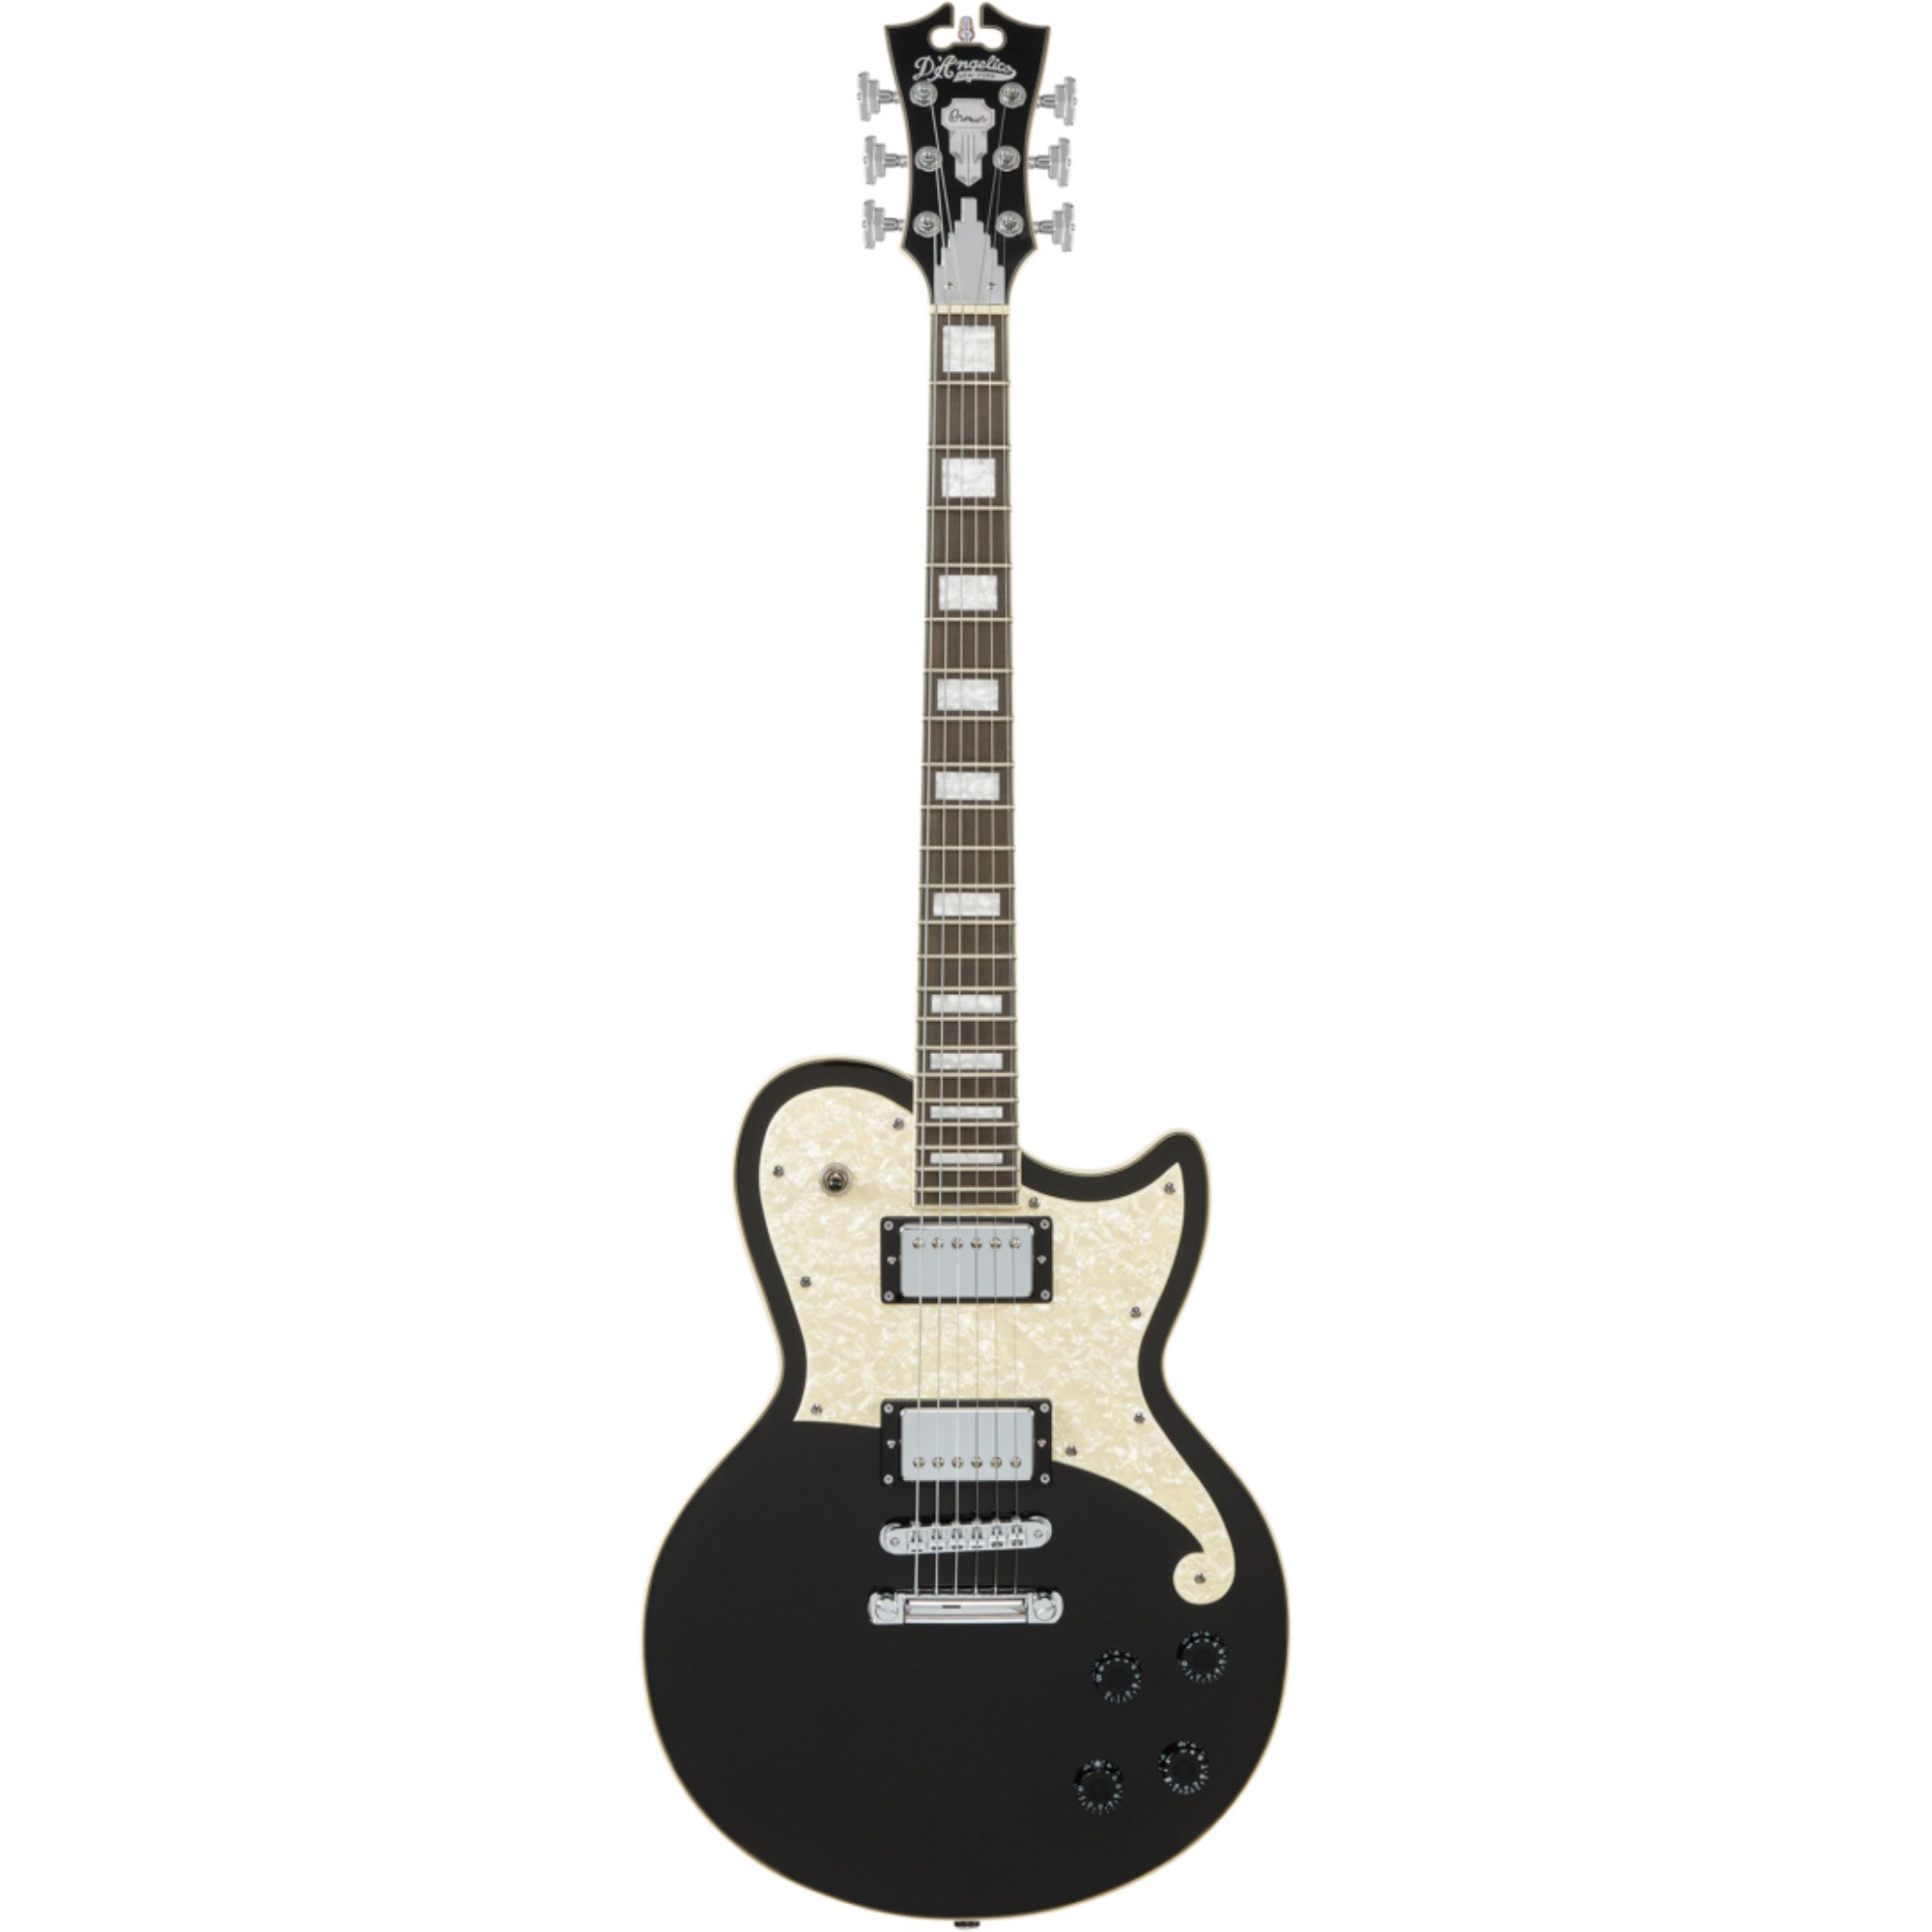 D'Angelico, D’Angelico Premier Atlantic Electric Guitar with Stopbar Tailpiece, Black Flake